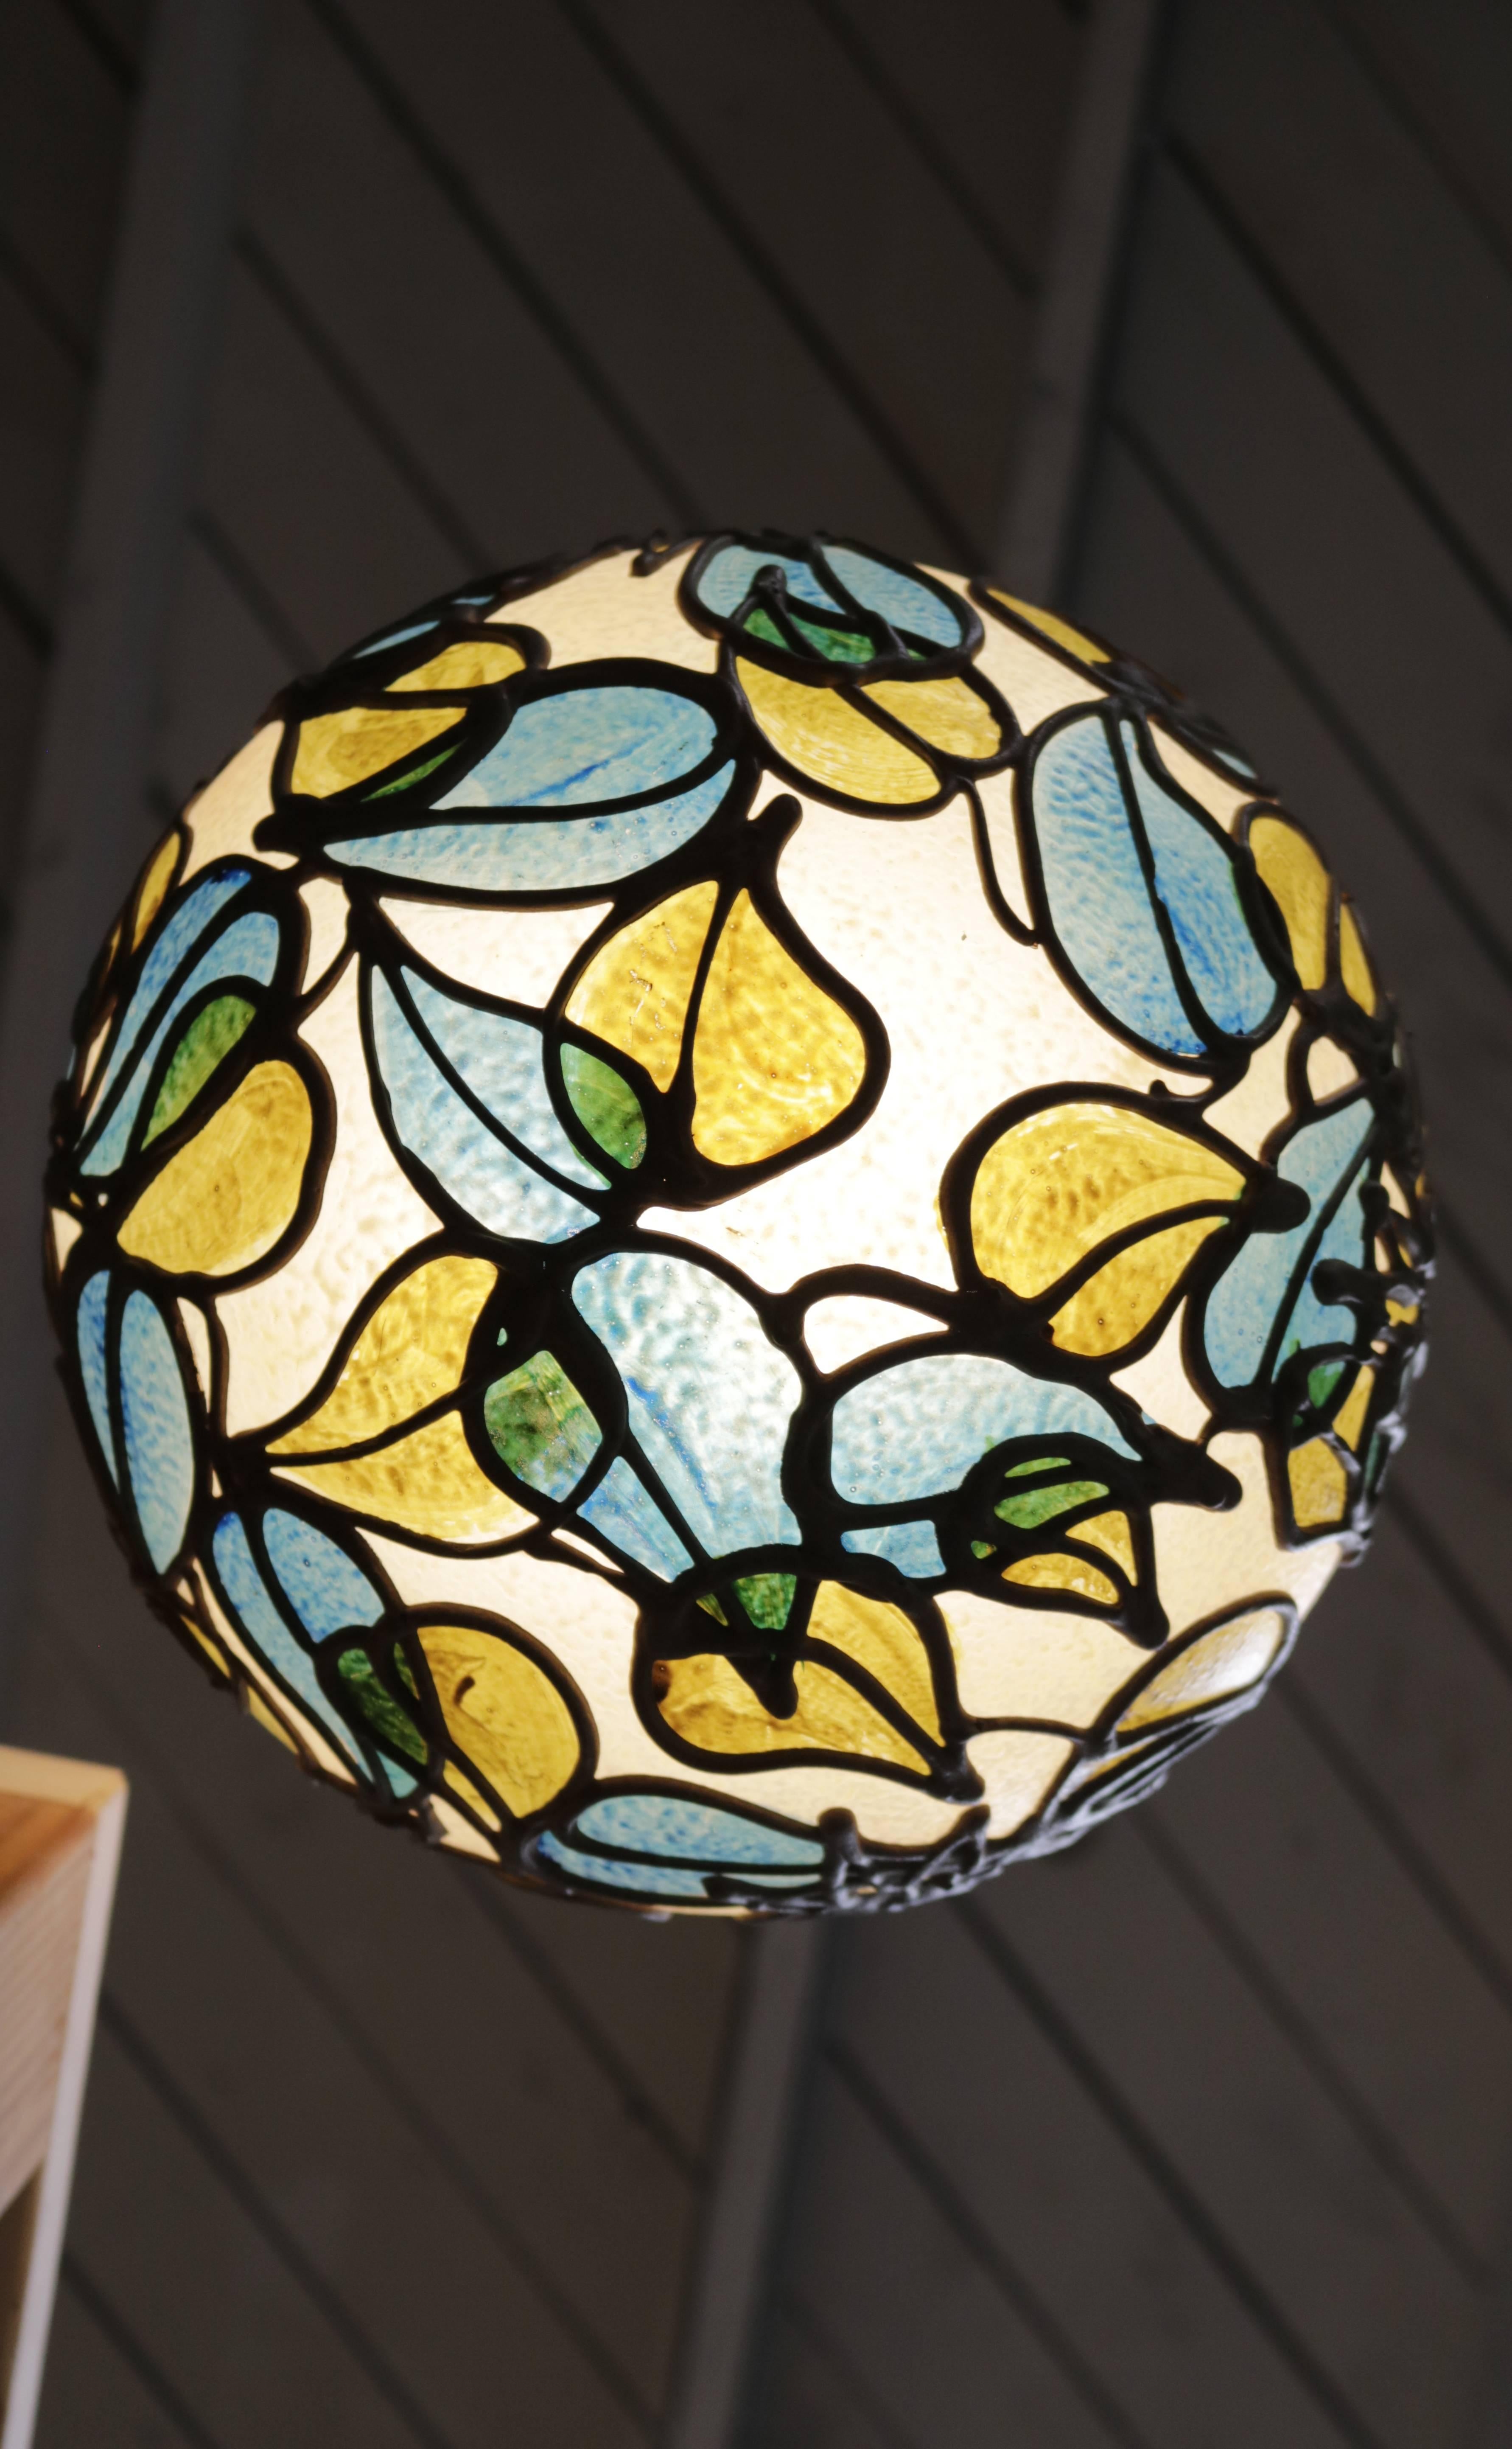 Hand decorated resin globe hanging from a hammered brass top. Displays a warm glow when lit.